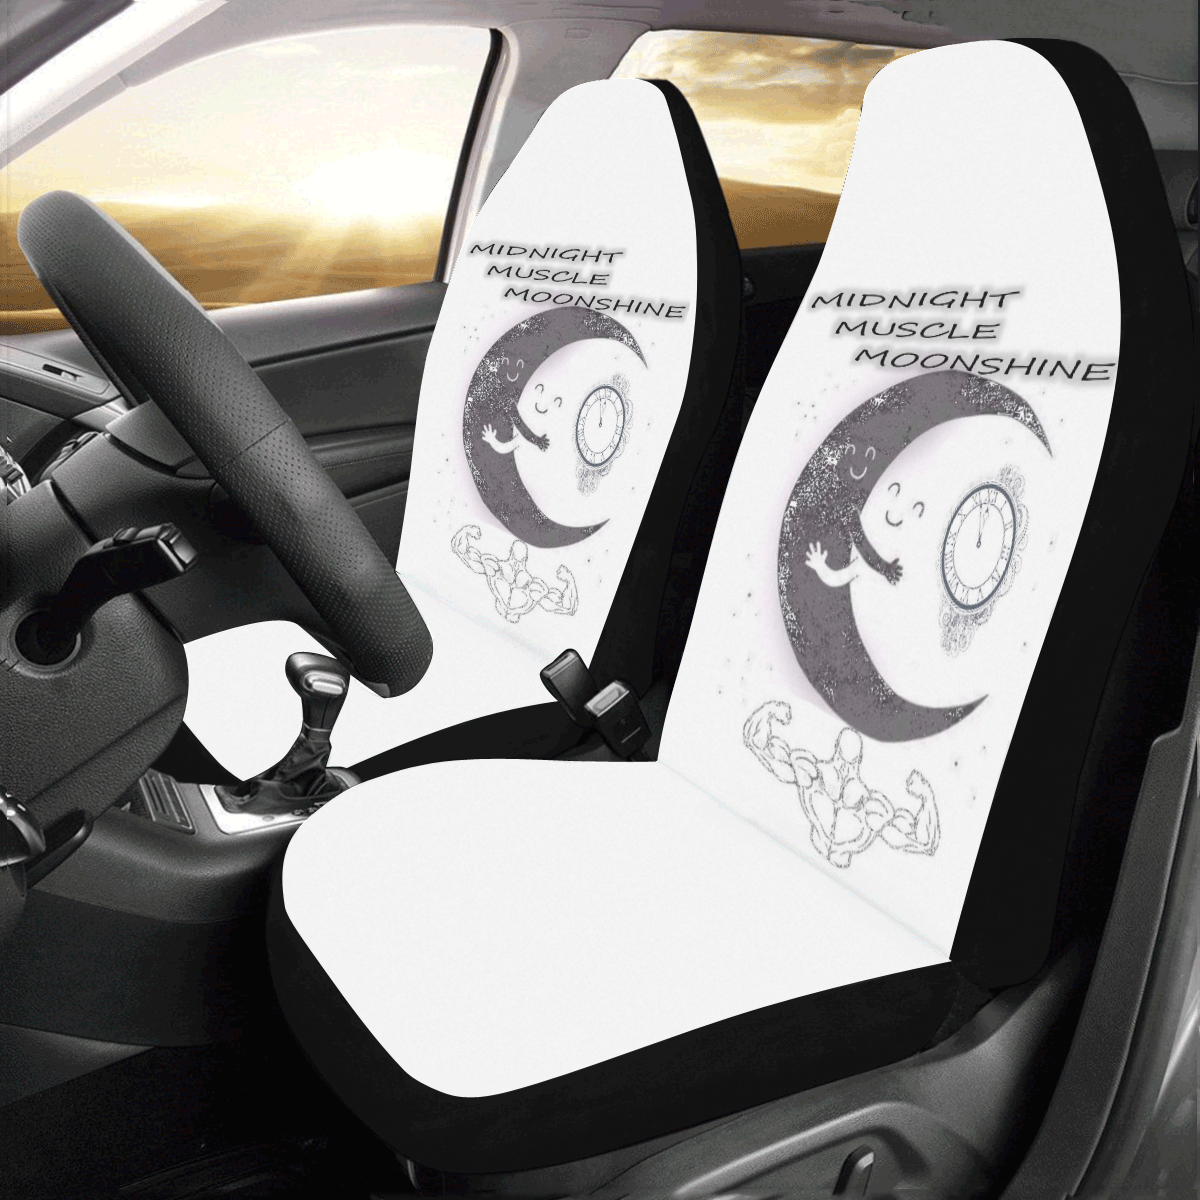 whyt3mshy Car Seat Covers (Set of 2)